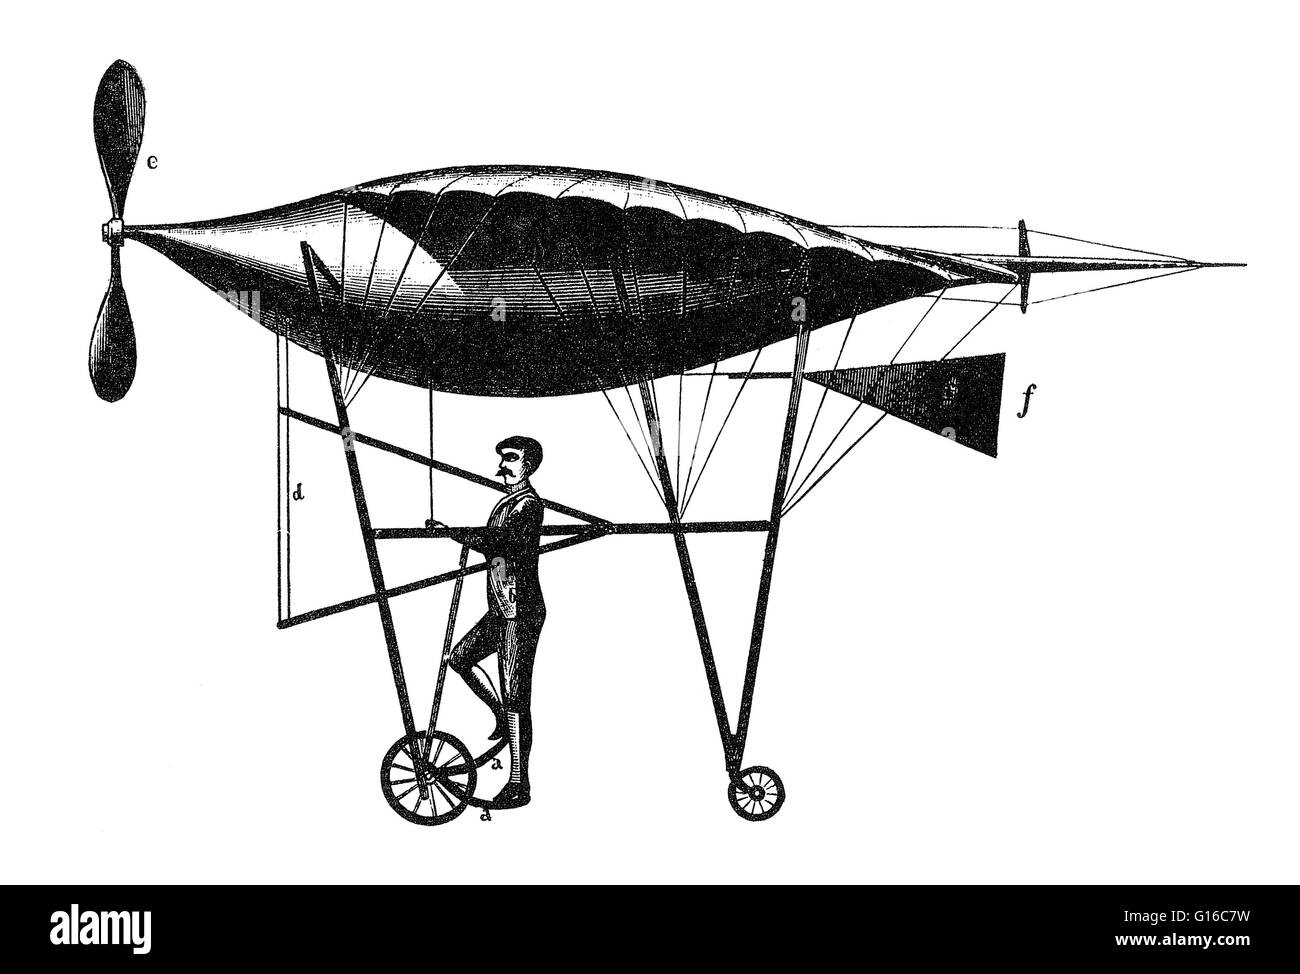 Alexandre Goupil was a French engineer of note who designed a bird-like flying machine in 1883. The sesquiplane (a monoplane with additional half-wings) was to be powered by a steam engine (mounted within the deep rounded body of the machine) driving a si Stock Photo